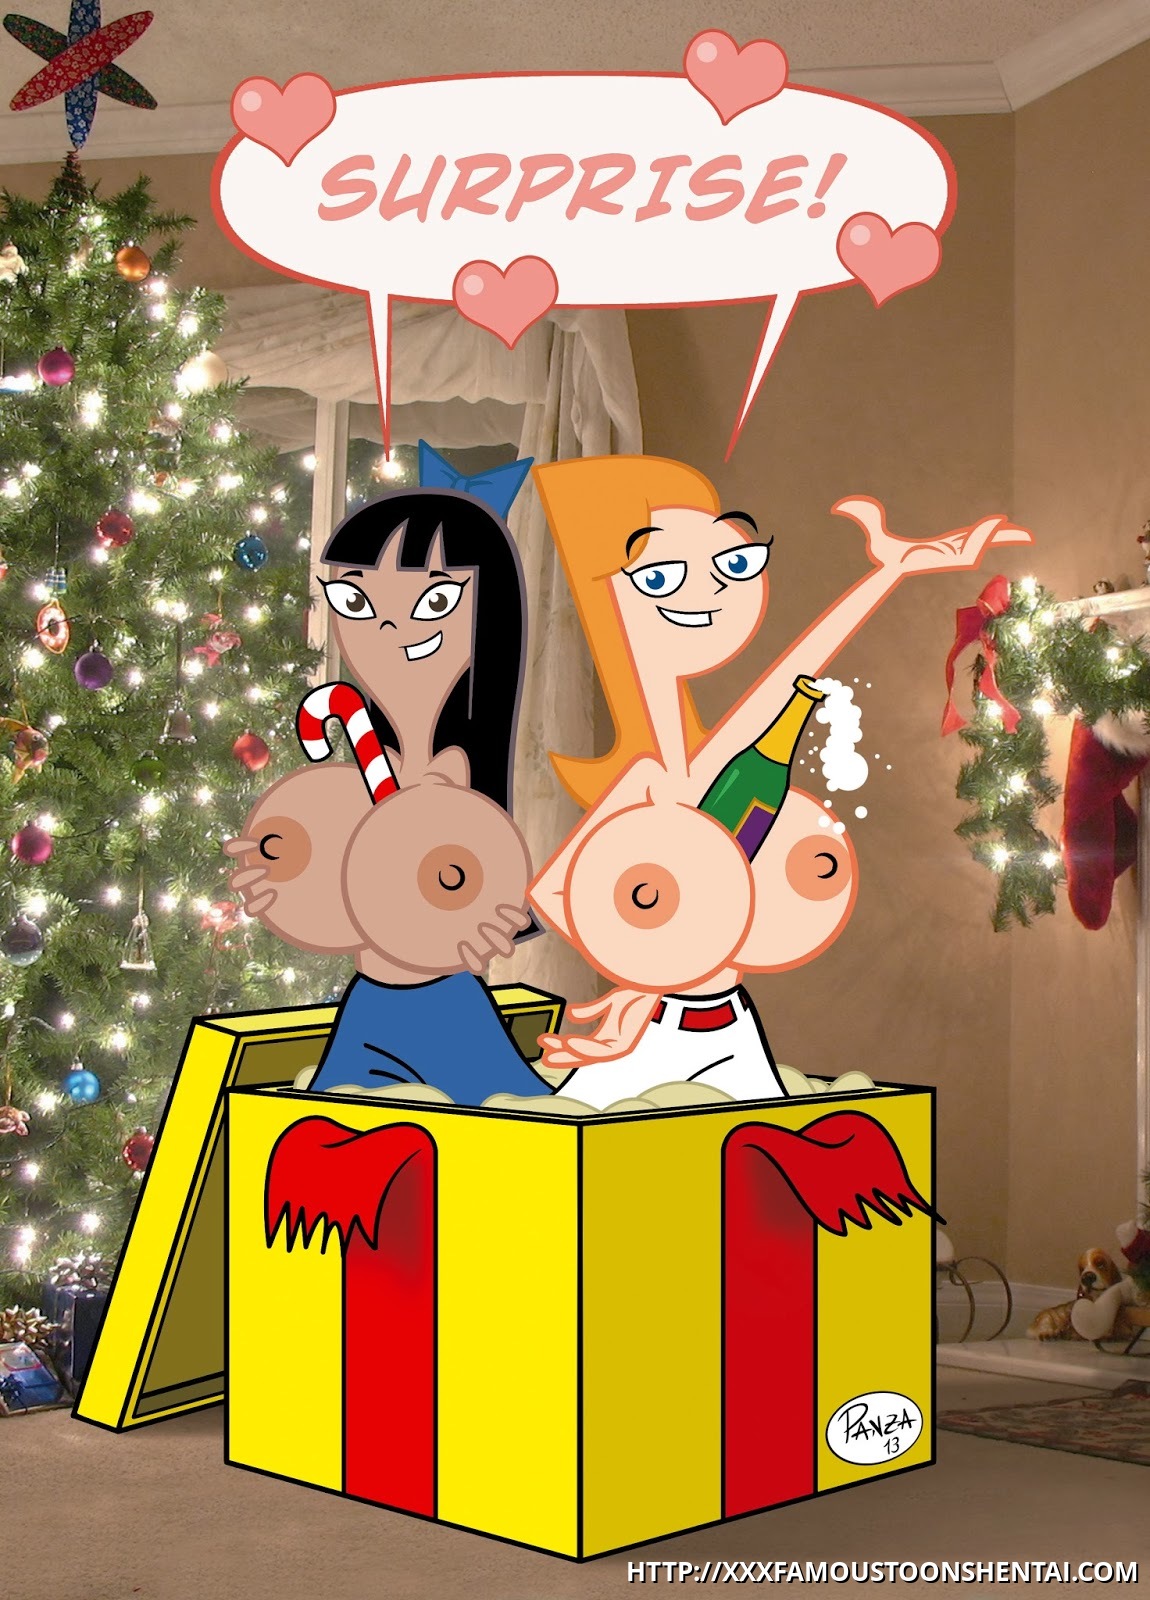 Phineas And Ferb Lesbians - Candace Flynn and Stacy Hirano busty surprise â€“ Phineas and Ferb Cartoon Sex